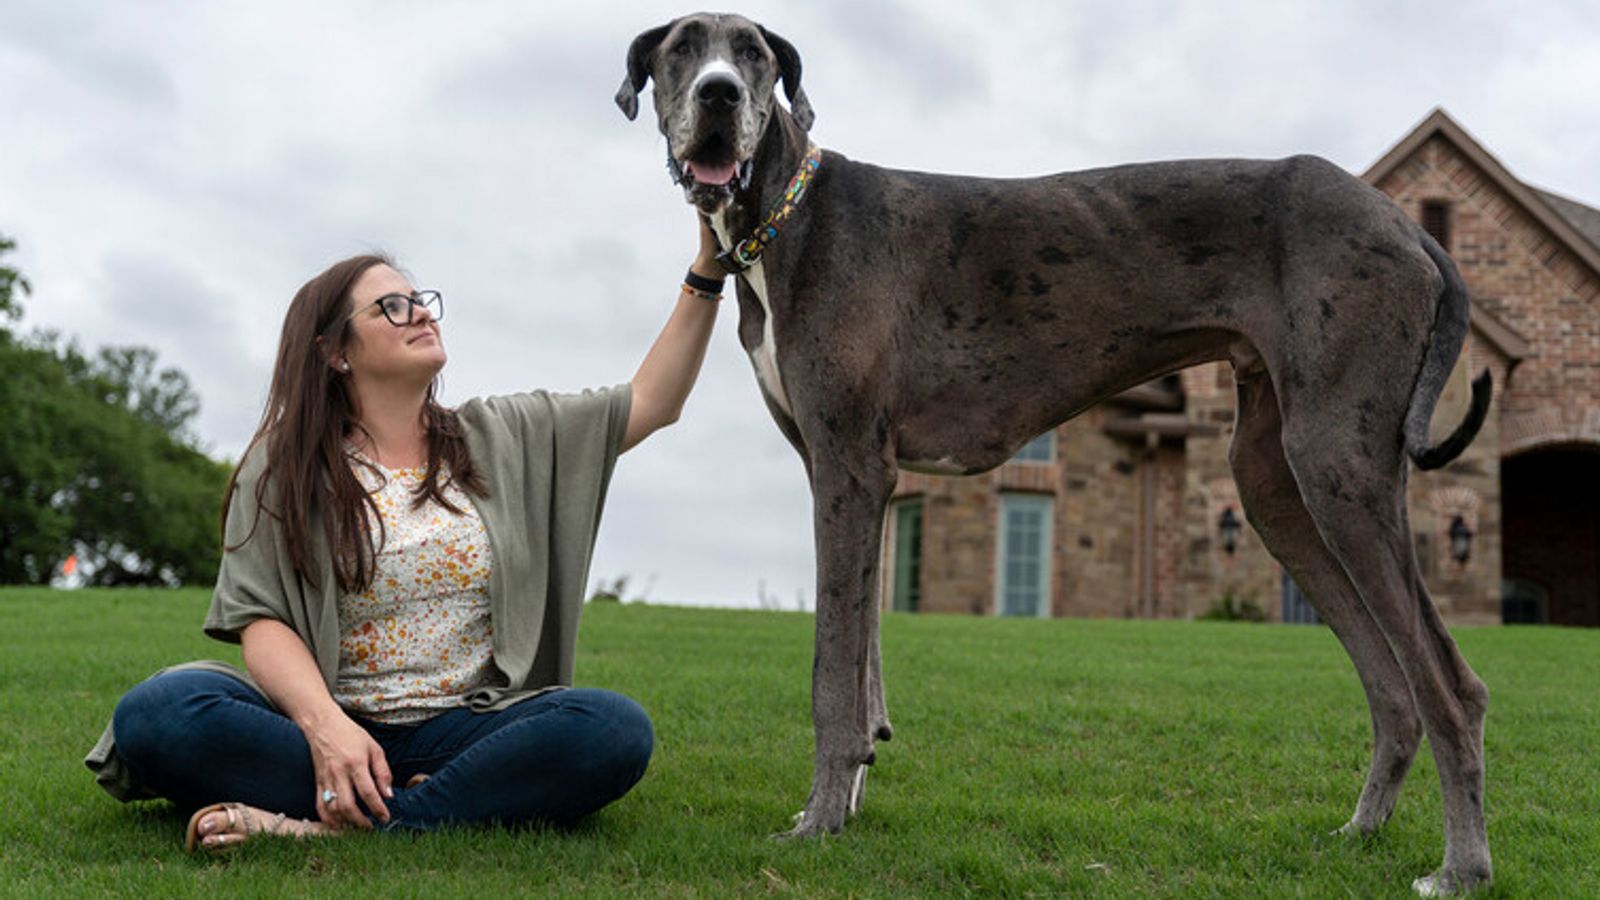 Zeus, the world's tallest male dog, has died from complications following treatment